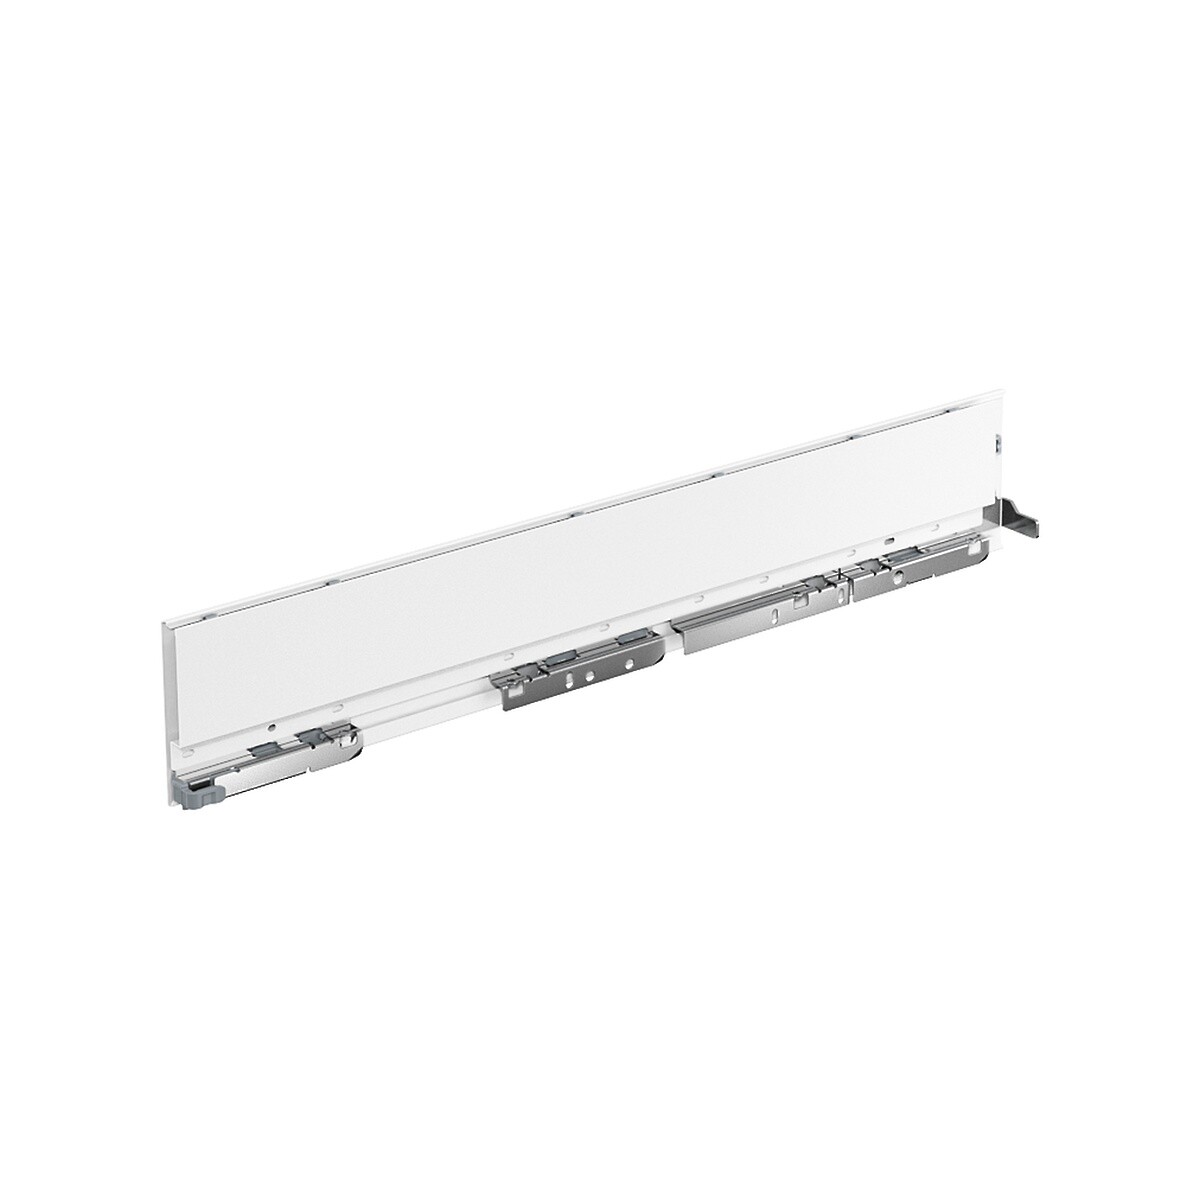 AvanTech YOU Drawer side profile, height 101 mm x NL 550 mm, White, Right